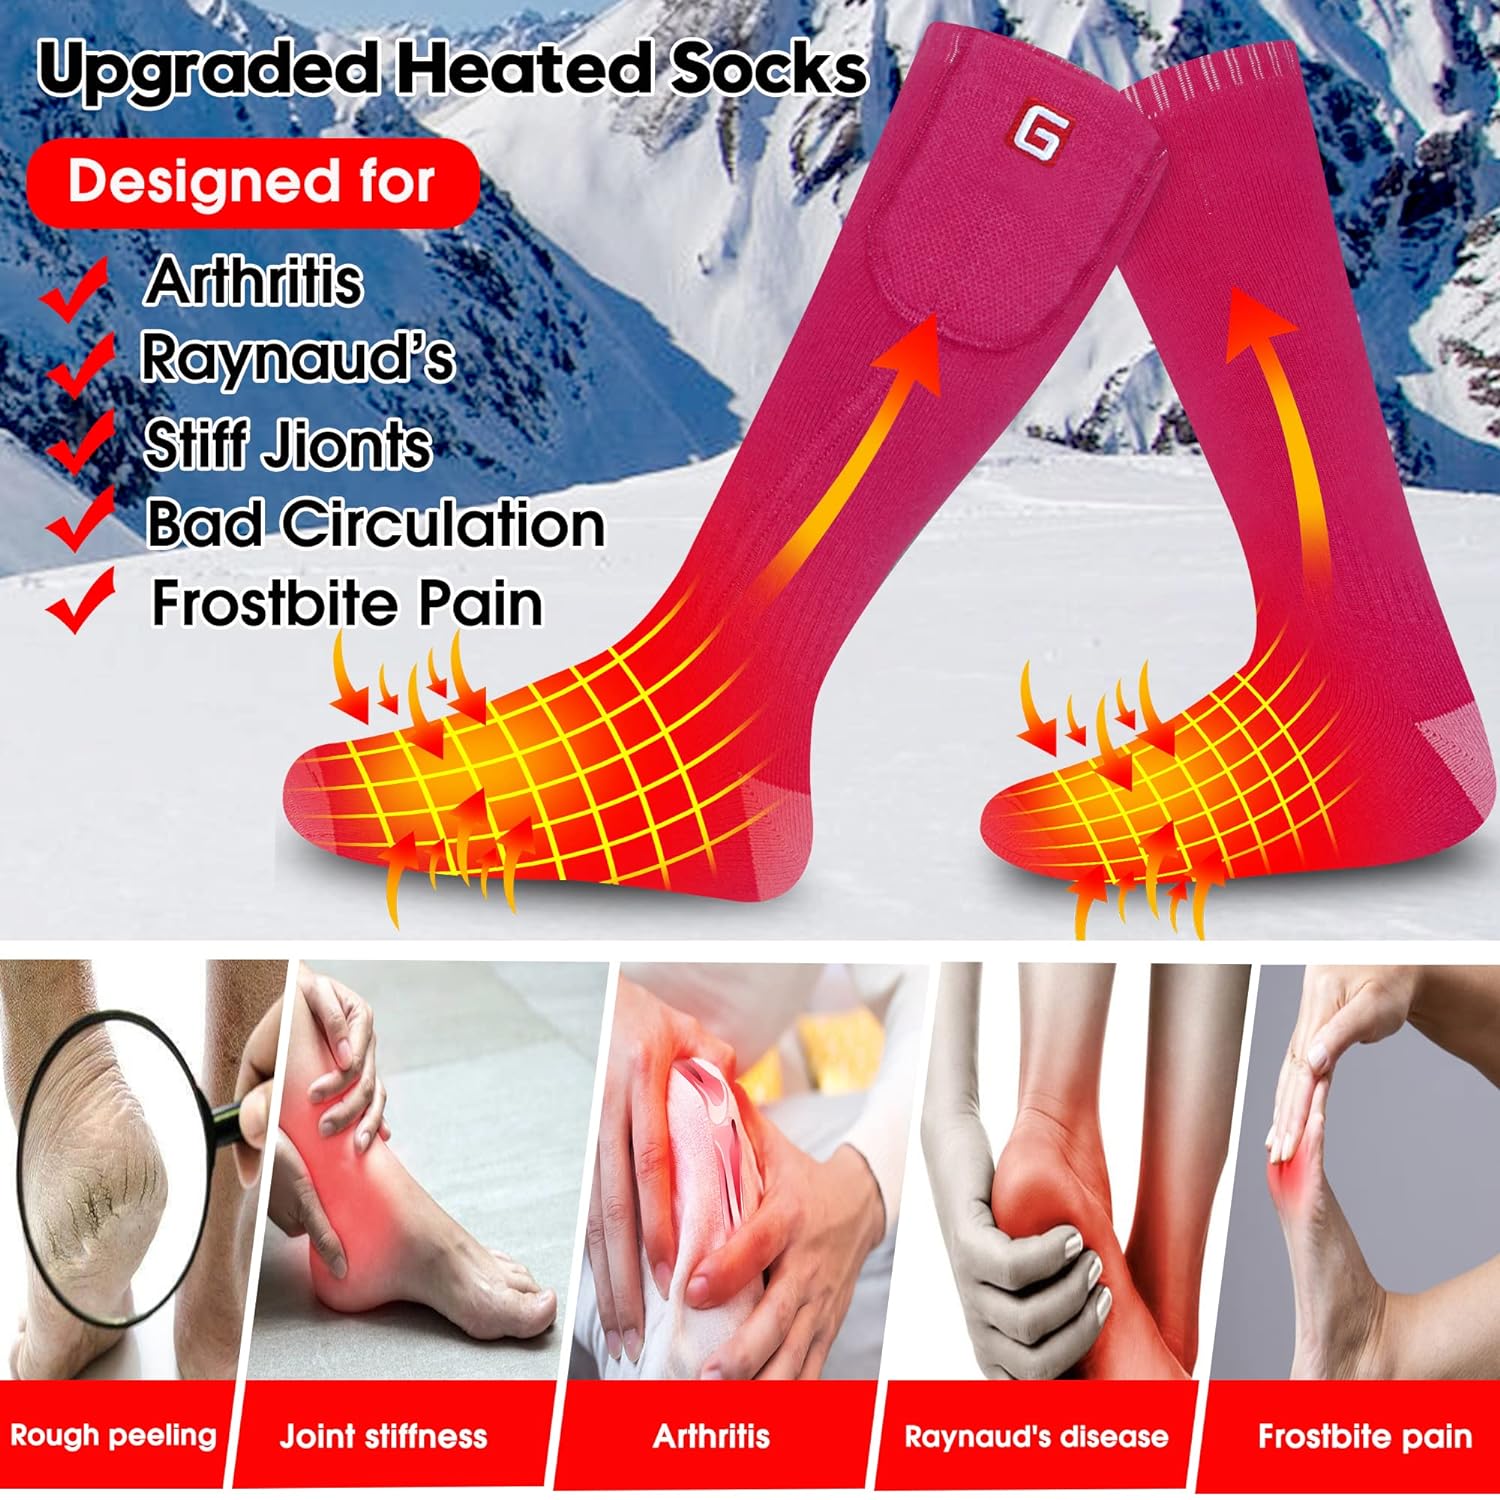 GEMSTONEGO Heated Socks for Women Electric Rechargeable Battery Heated Socks,Winter Cotton Warm Heated Socks for Arthritis,Machine Washable Electric Thermal Heated Socks for Hiking Skiing Camping